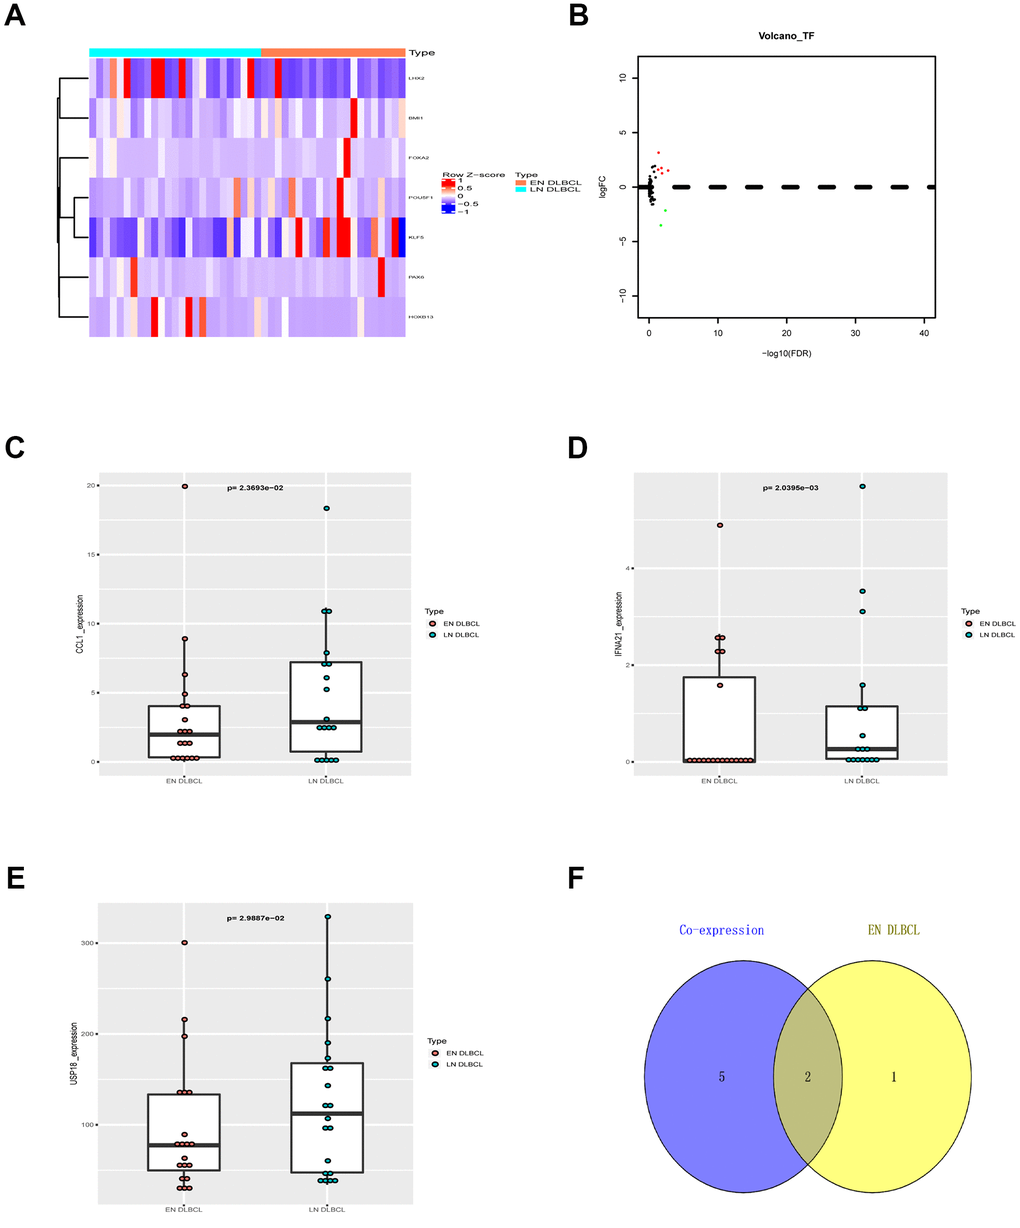 The DETFs between EN and LN DLBCL. (A) The heatmap and (B) volcano plot of 7 DETFs; (C) The box plot to show expression of CCL1 between EN and LN DLBCL; (D) The box plot to show expression of IFNA21 between EN and LN DLBCL; (E) The box plot to show expression of USP18 between EN and LN DLBCL; (F) The Venn plot to show overlap of ENI- and DETFs- related immune genes. Abbreviations: DETFs, Differentially expressed transcription factors; CCL1, C-C motif chemokine ligand 1; IFNA21, Interferon alpha-21; USP18, Ubiquitin specific peptidase 18; ENI, Extranodal involvement.